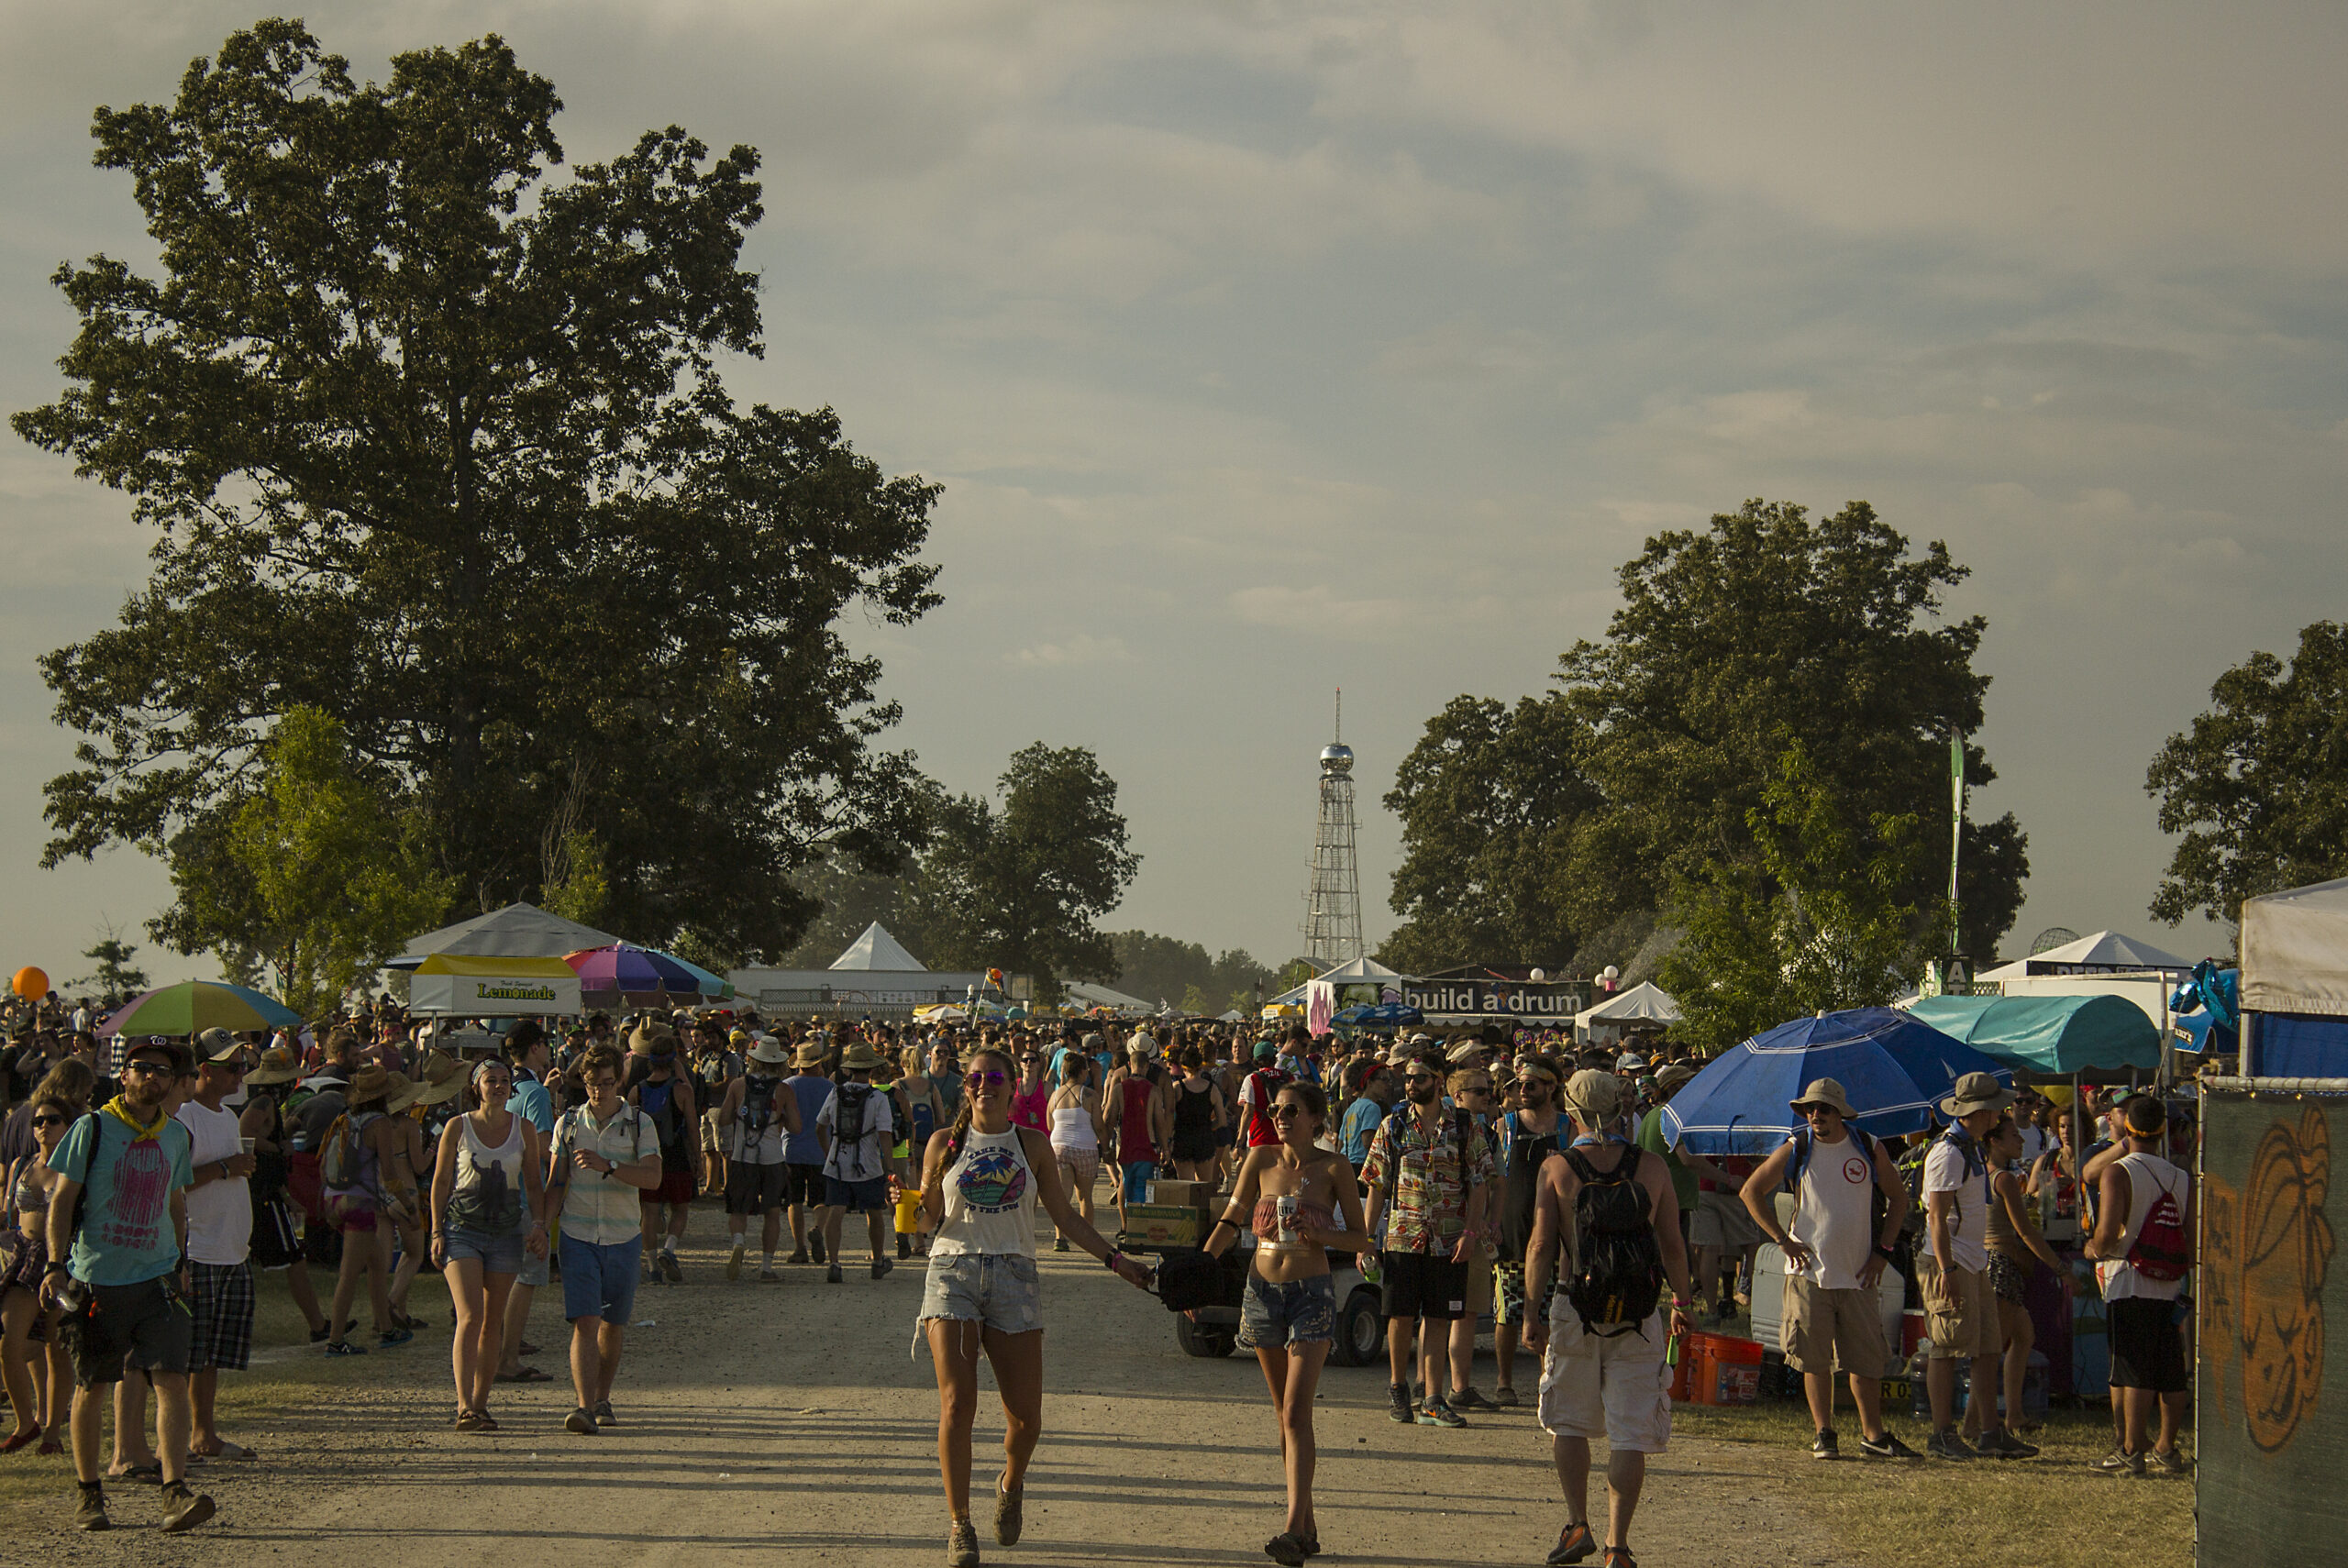 Bonnaroo Music & Arts Festival in Manchester, Tennessee on 06/12/15. Photo by: Matthew McGuire.